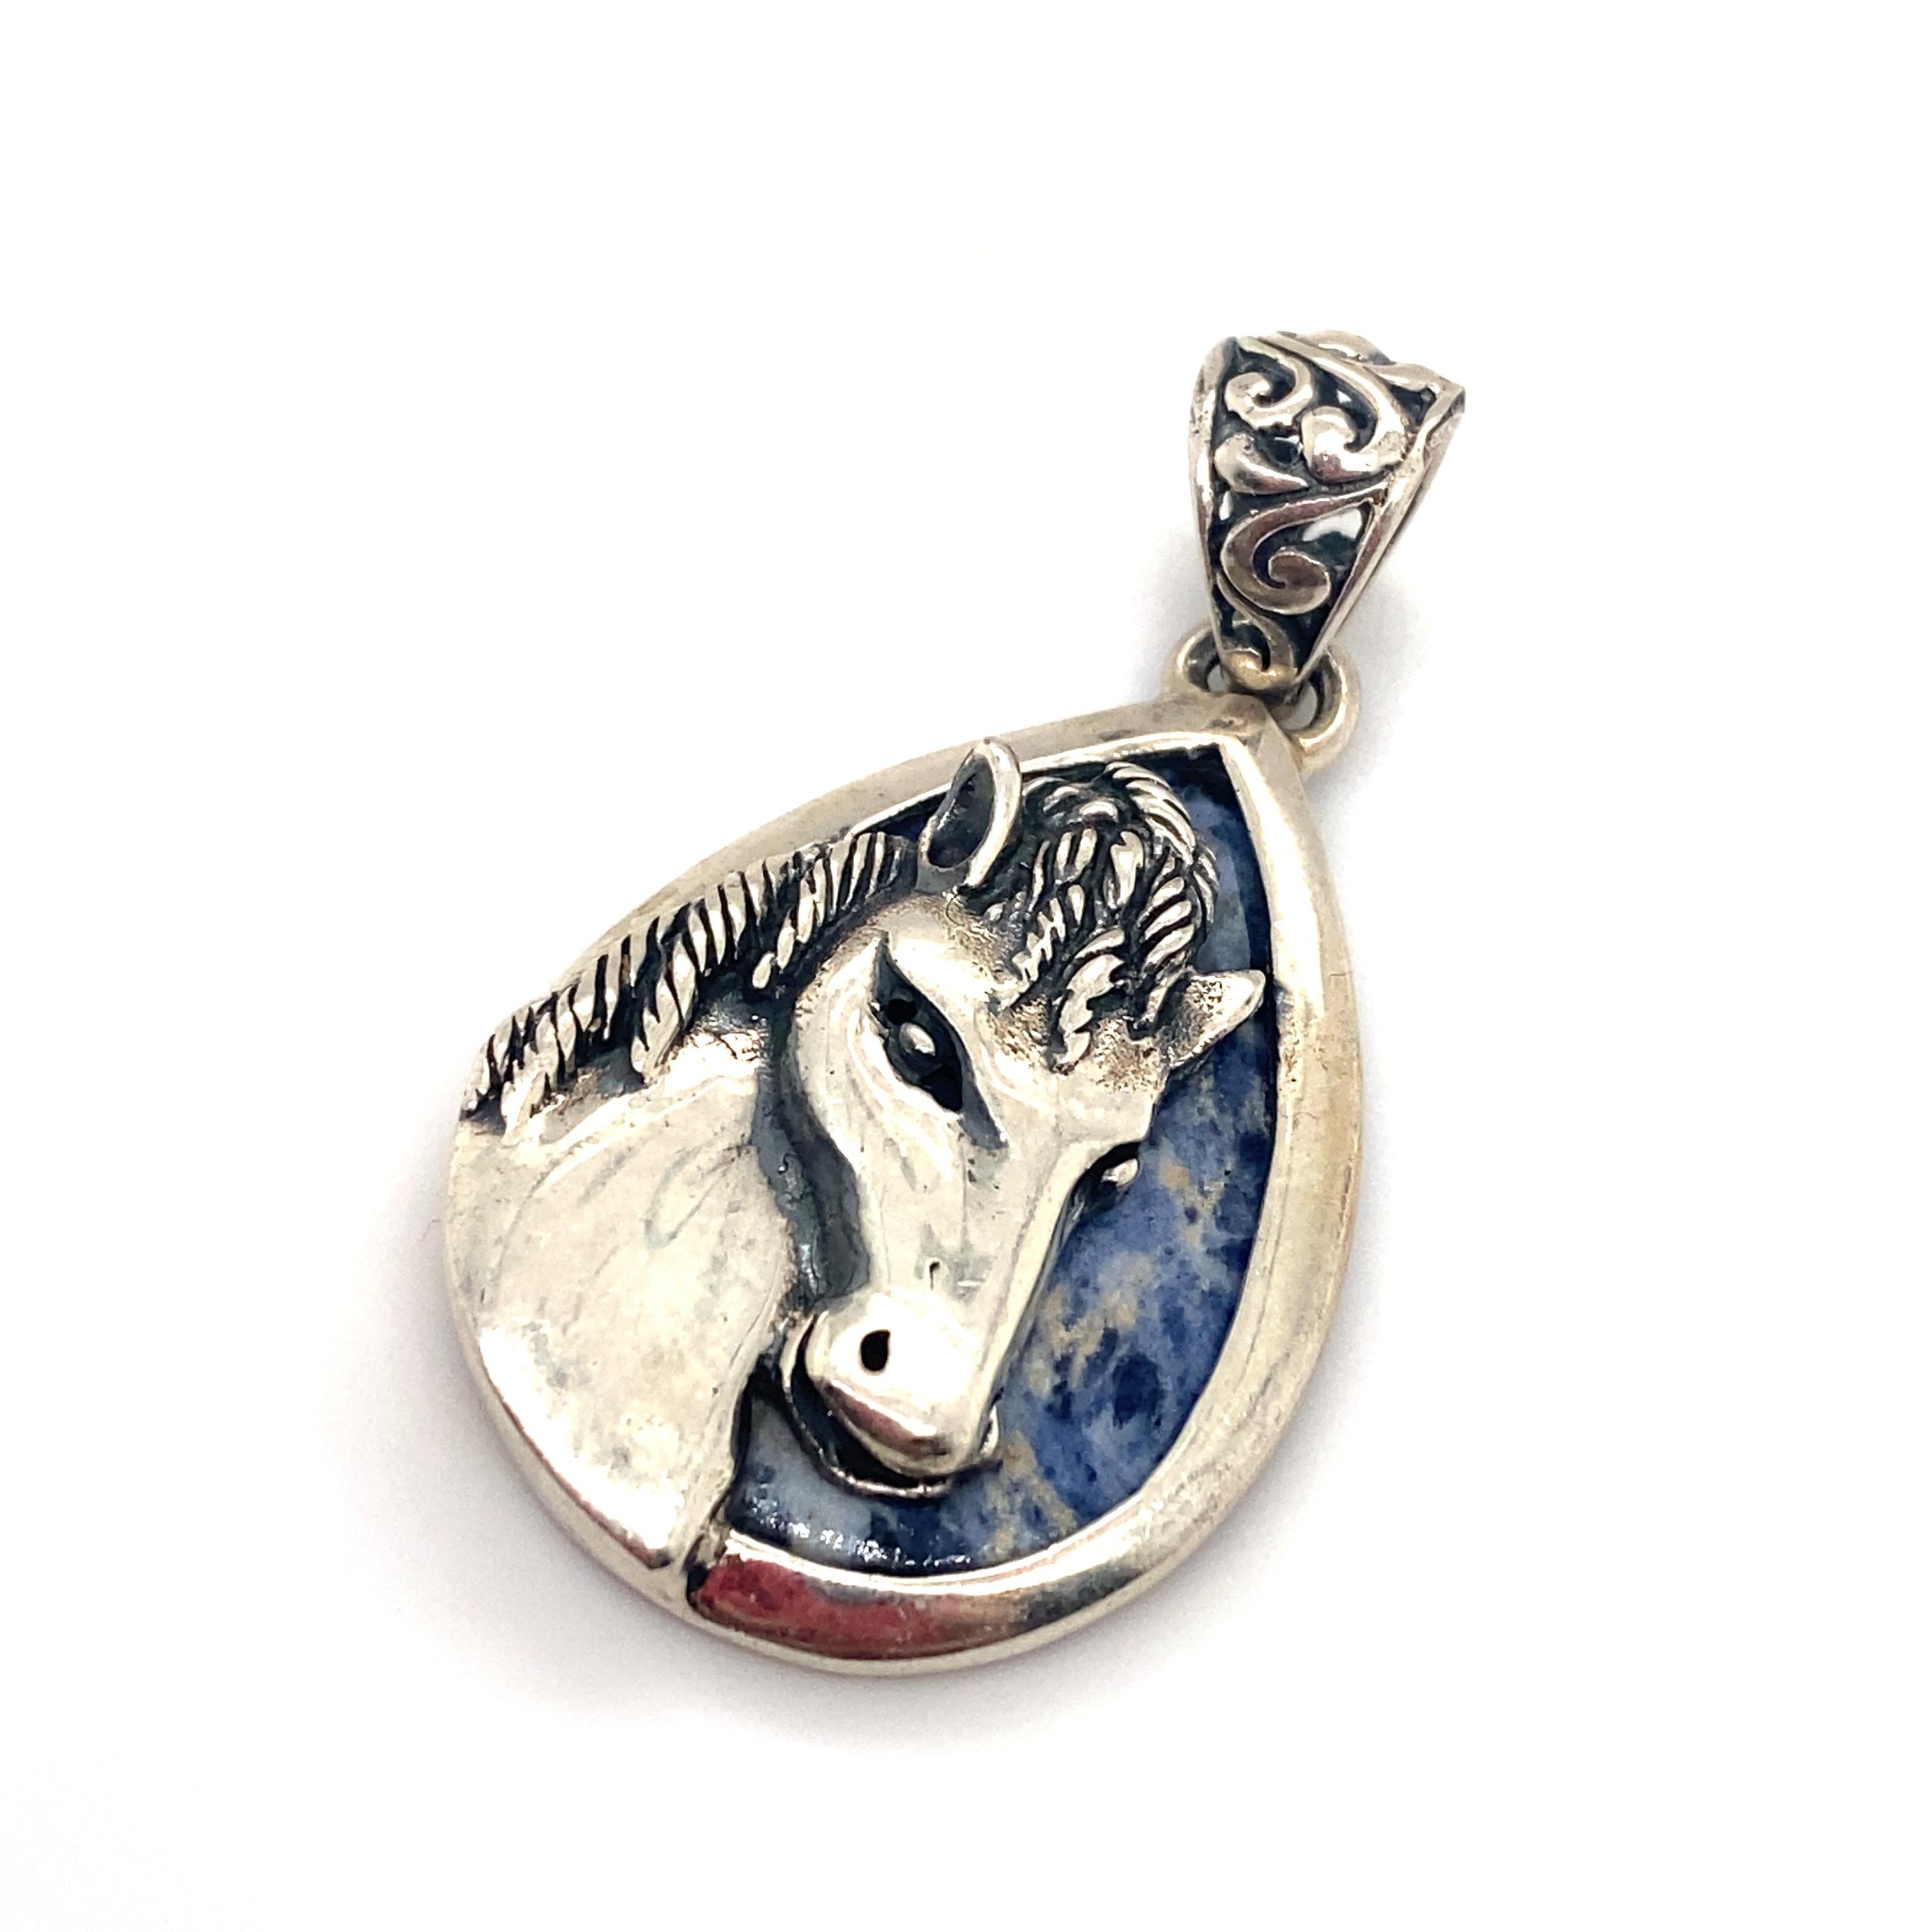 Item Details: This equestrian charm has a backing of a pear shaped labradorite and filigree detailing.

Circa: 21st Century
Metal Type: Sterling silver
Weight: 6.4g
Size: 1.5